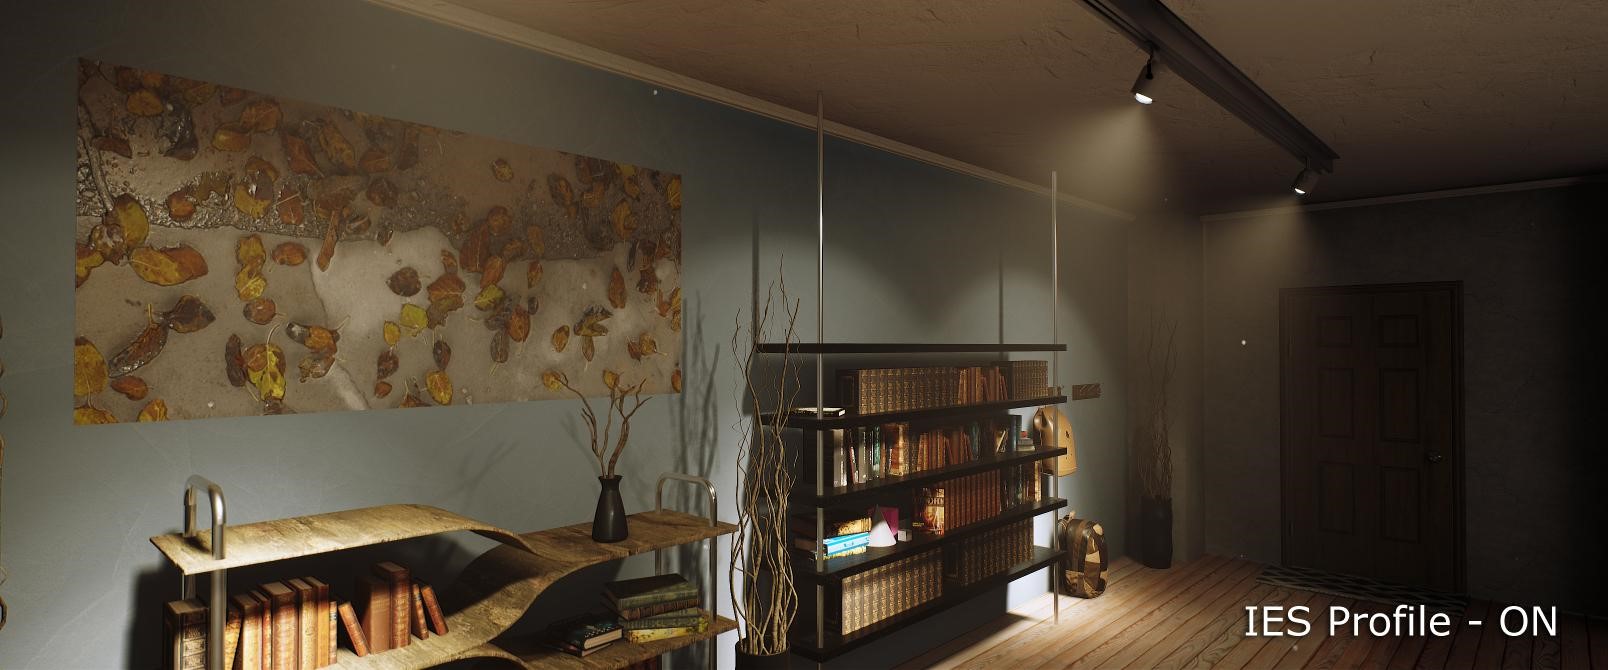 The Art of How to Create Realistic Lighting in Your Visualizations - Architizer Journal